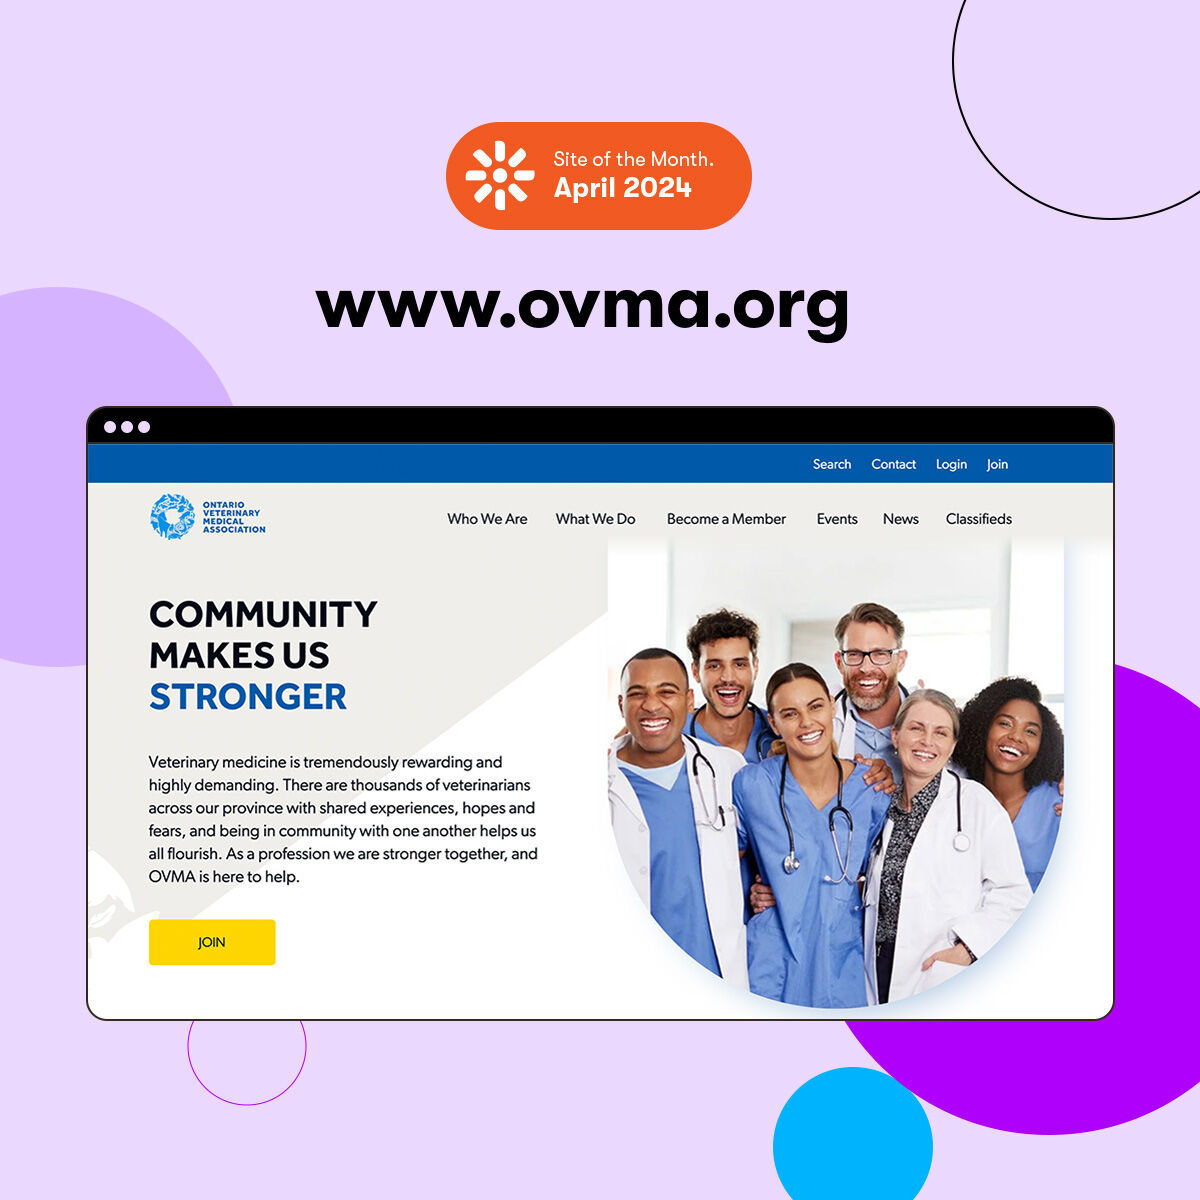 🐾 Site of the Month: OVMA teamed up with Inorbital to transform their website and intranet portal. Explore this and other Site of the Month winners today 👉 link.kentico.net/4a5xPqA 

#SiteOfTheMonth #digitaltransformation #DXP #CMS